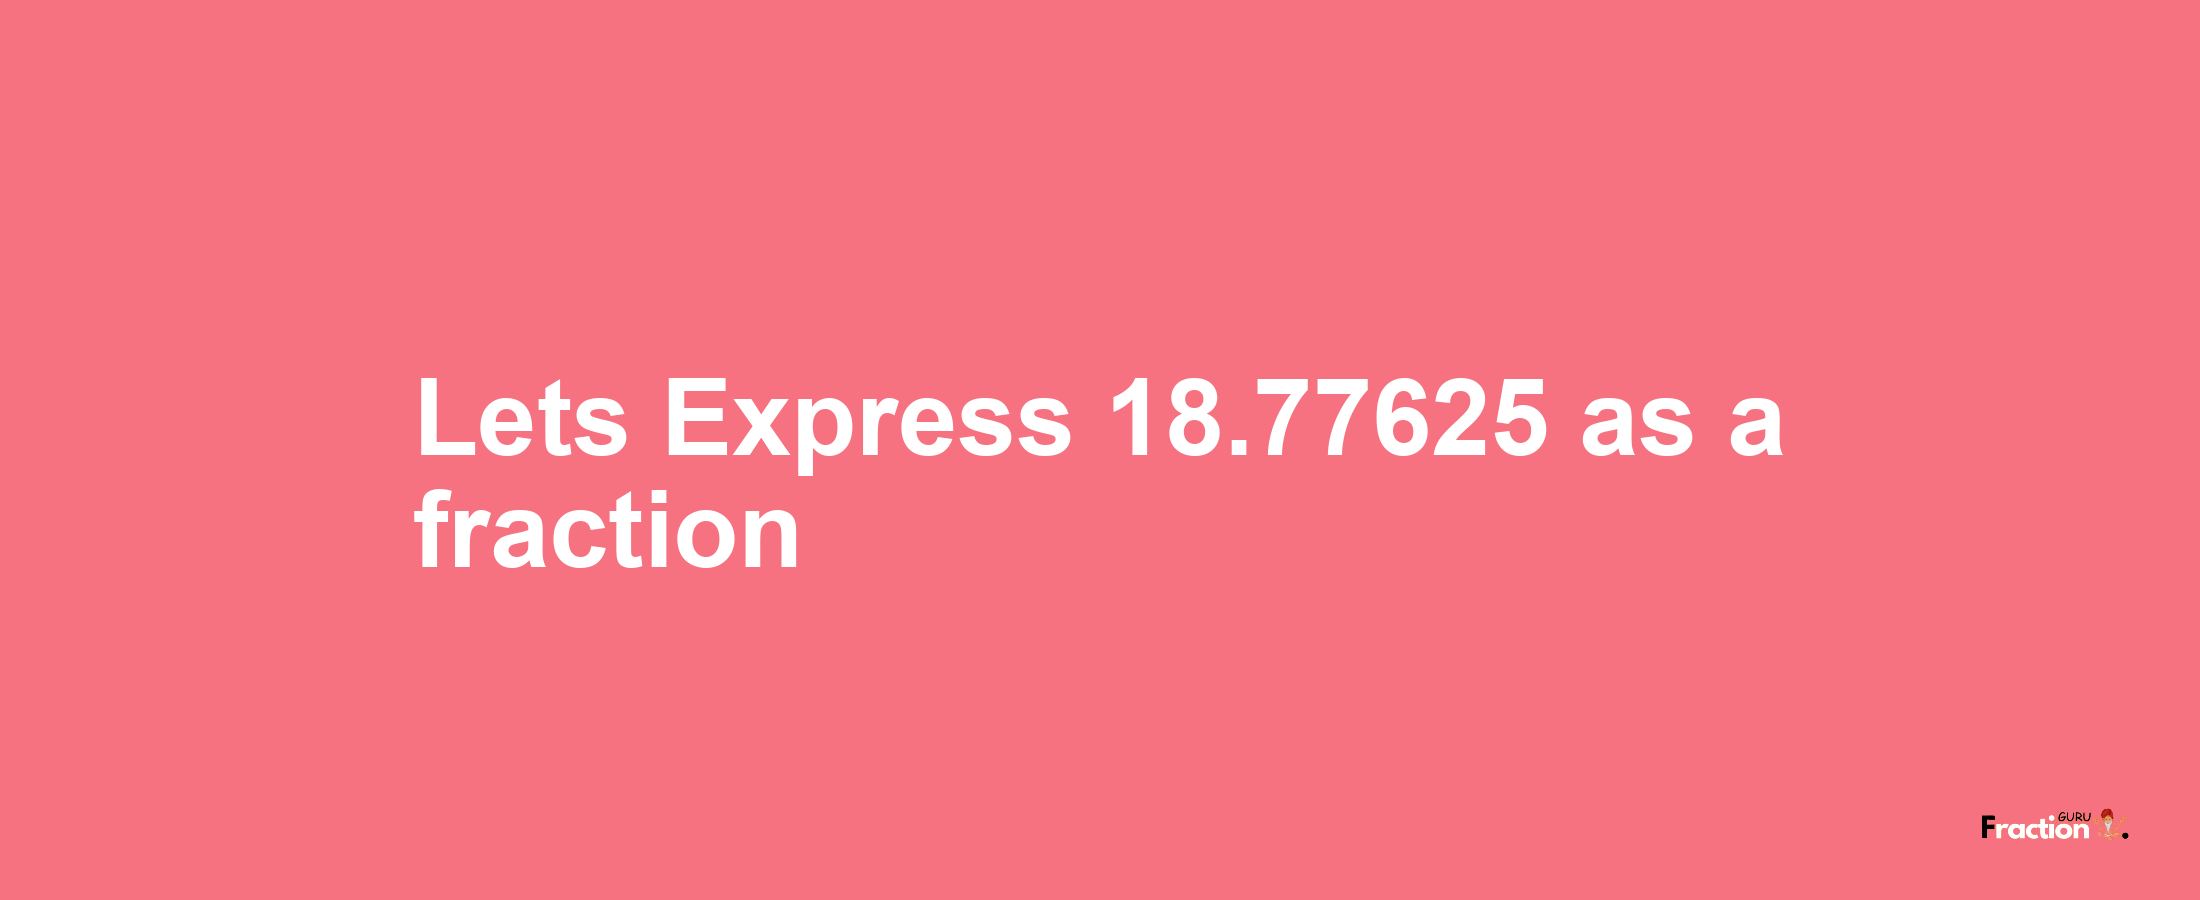 Lets Express 18.77625 as afraction